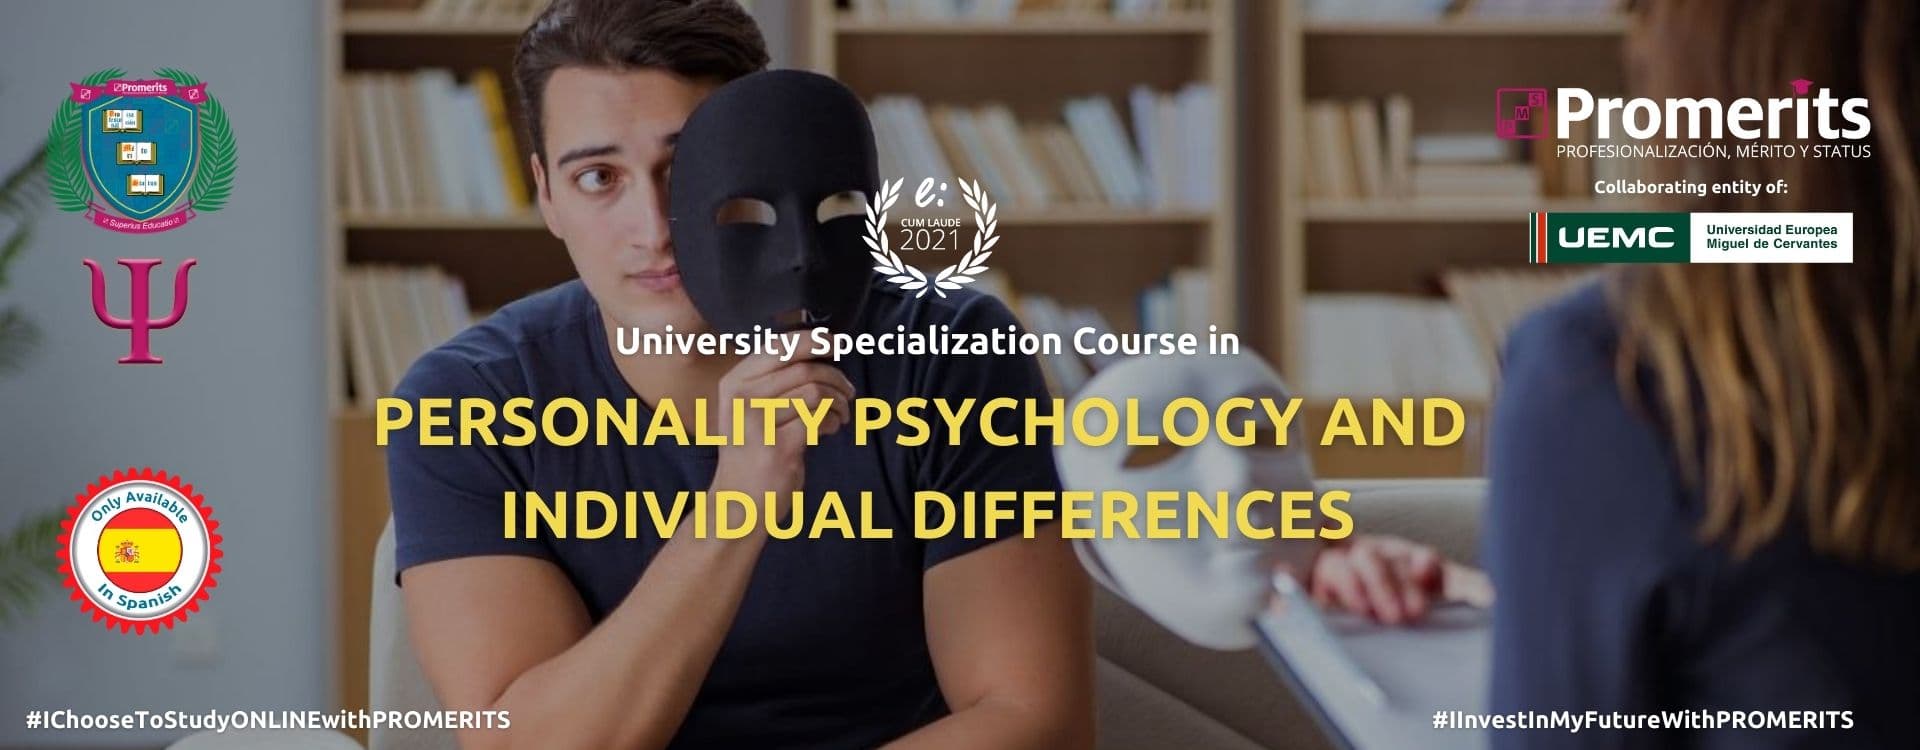 University Specialization Course in Personality Psychology and Individual Differences